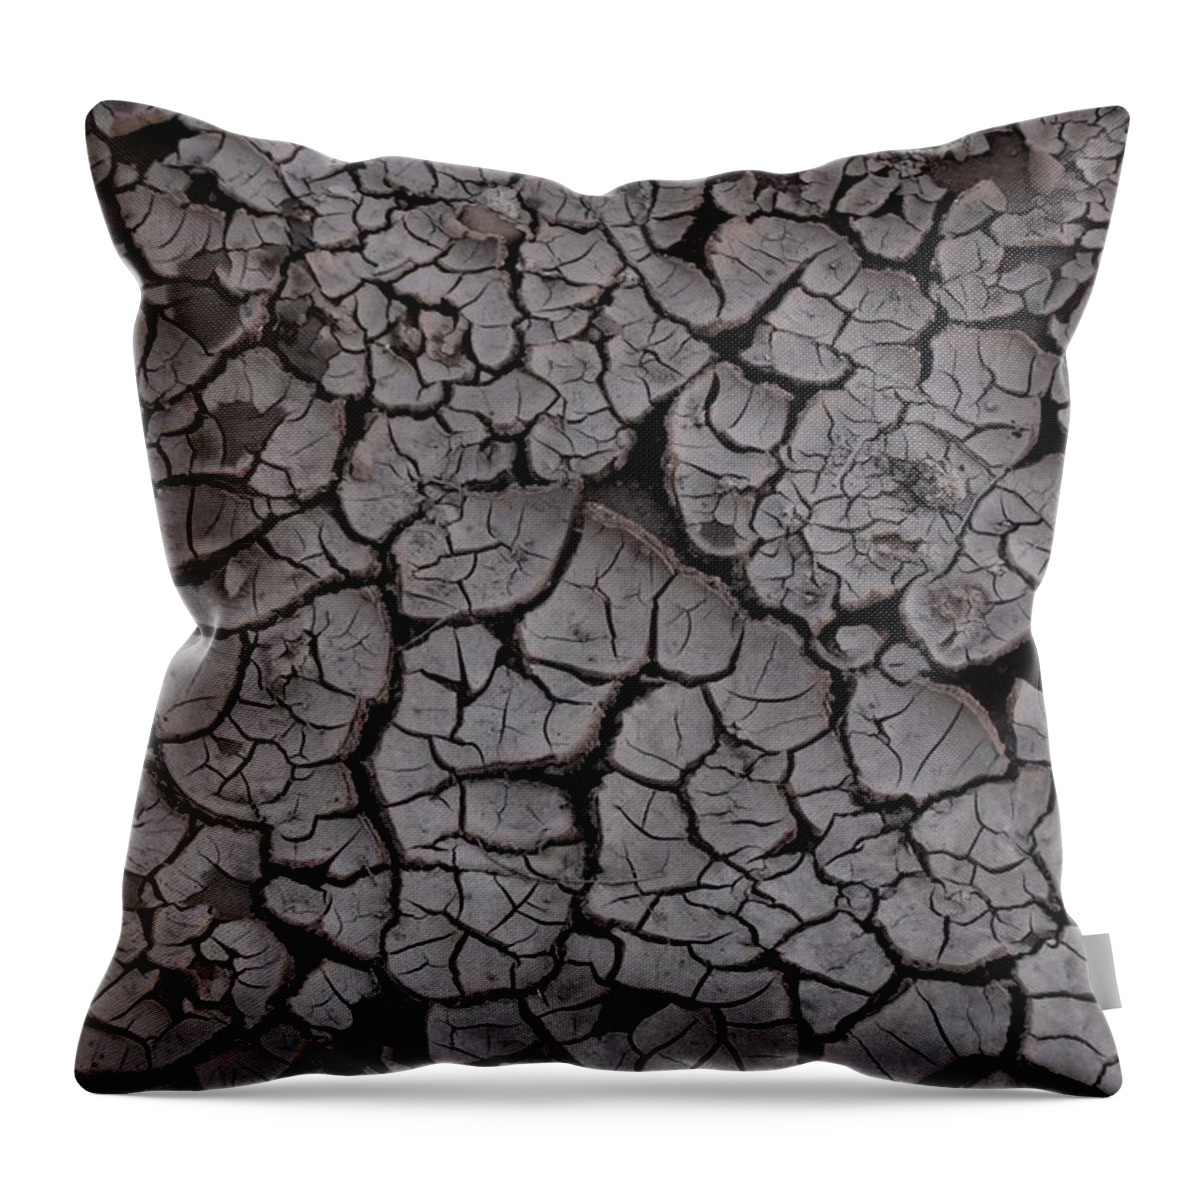 Crack Throw Pillow featuring the photograph Cracked by Melisa Elliott